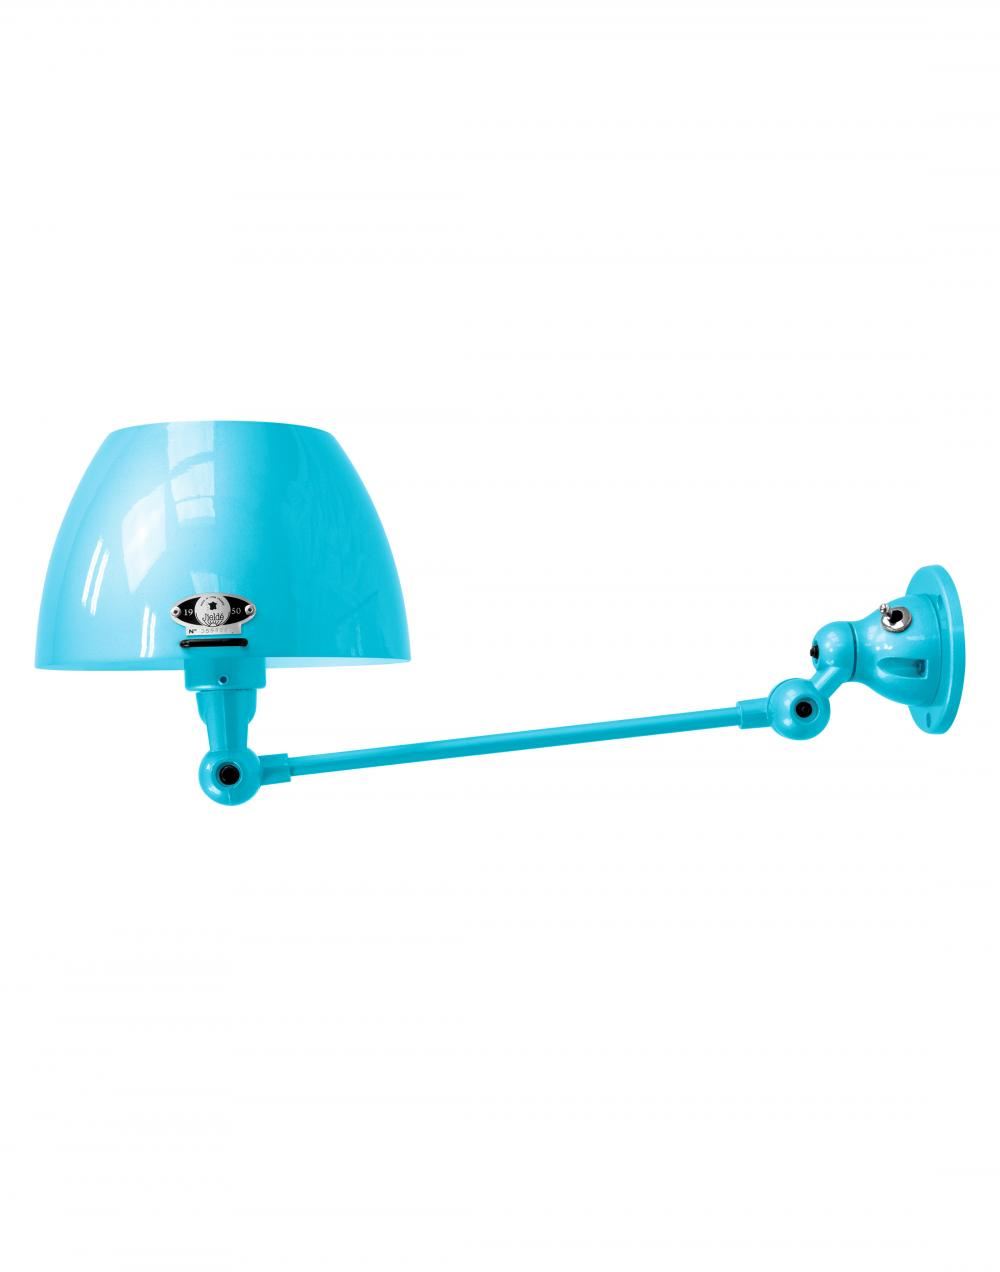 Jielde Aicler One Arm Adjustable Wall Light Curved Shade Pastel Blue Matt Hardwired No Switch